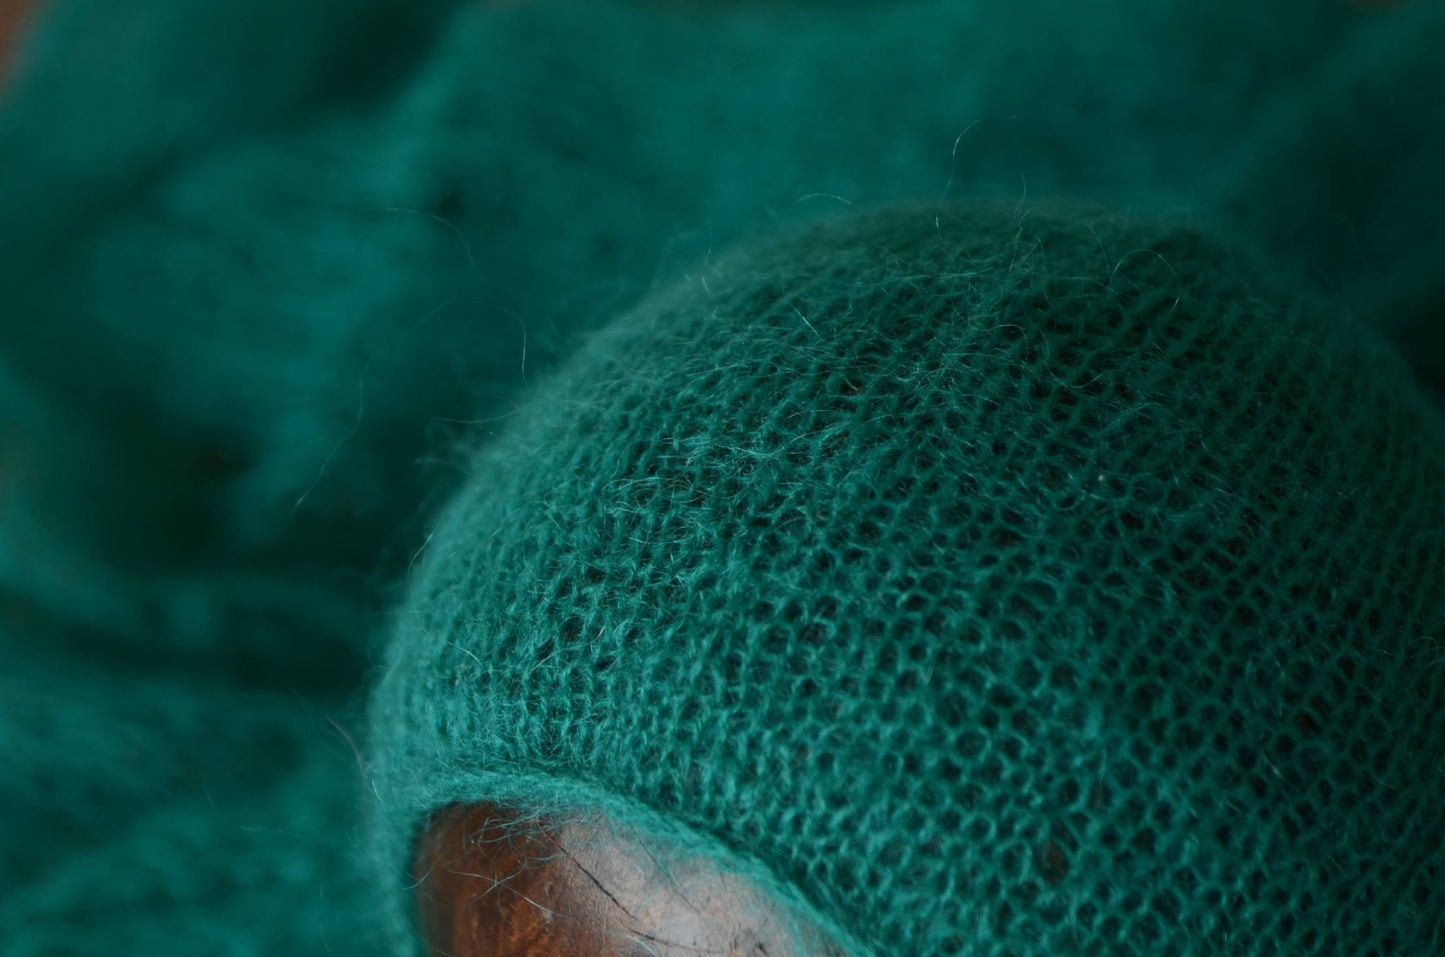 SET Mohair Knit Baby Wrap and Bonnet - Peacock Green-Newborn Photography Props